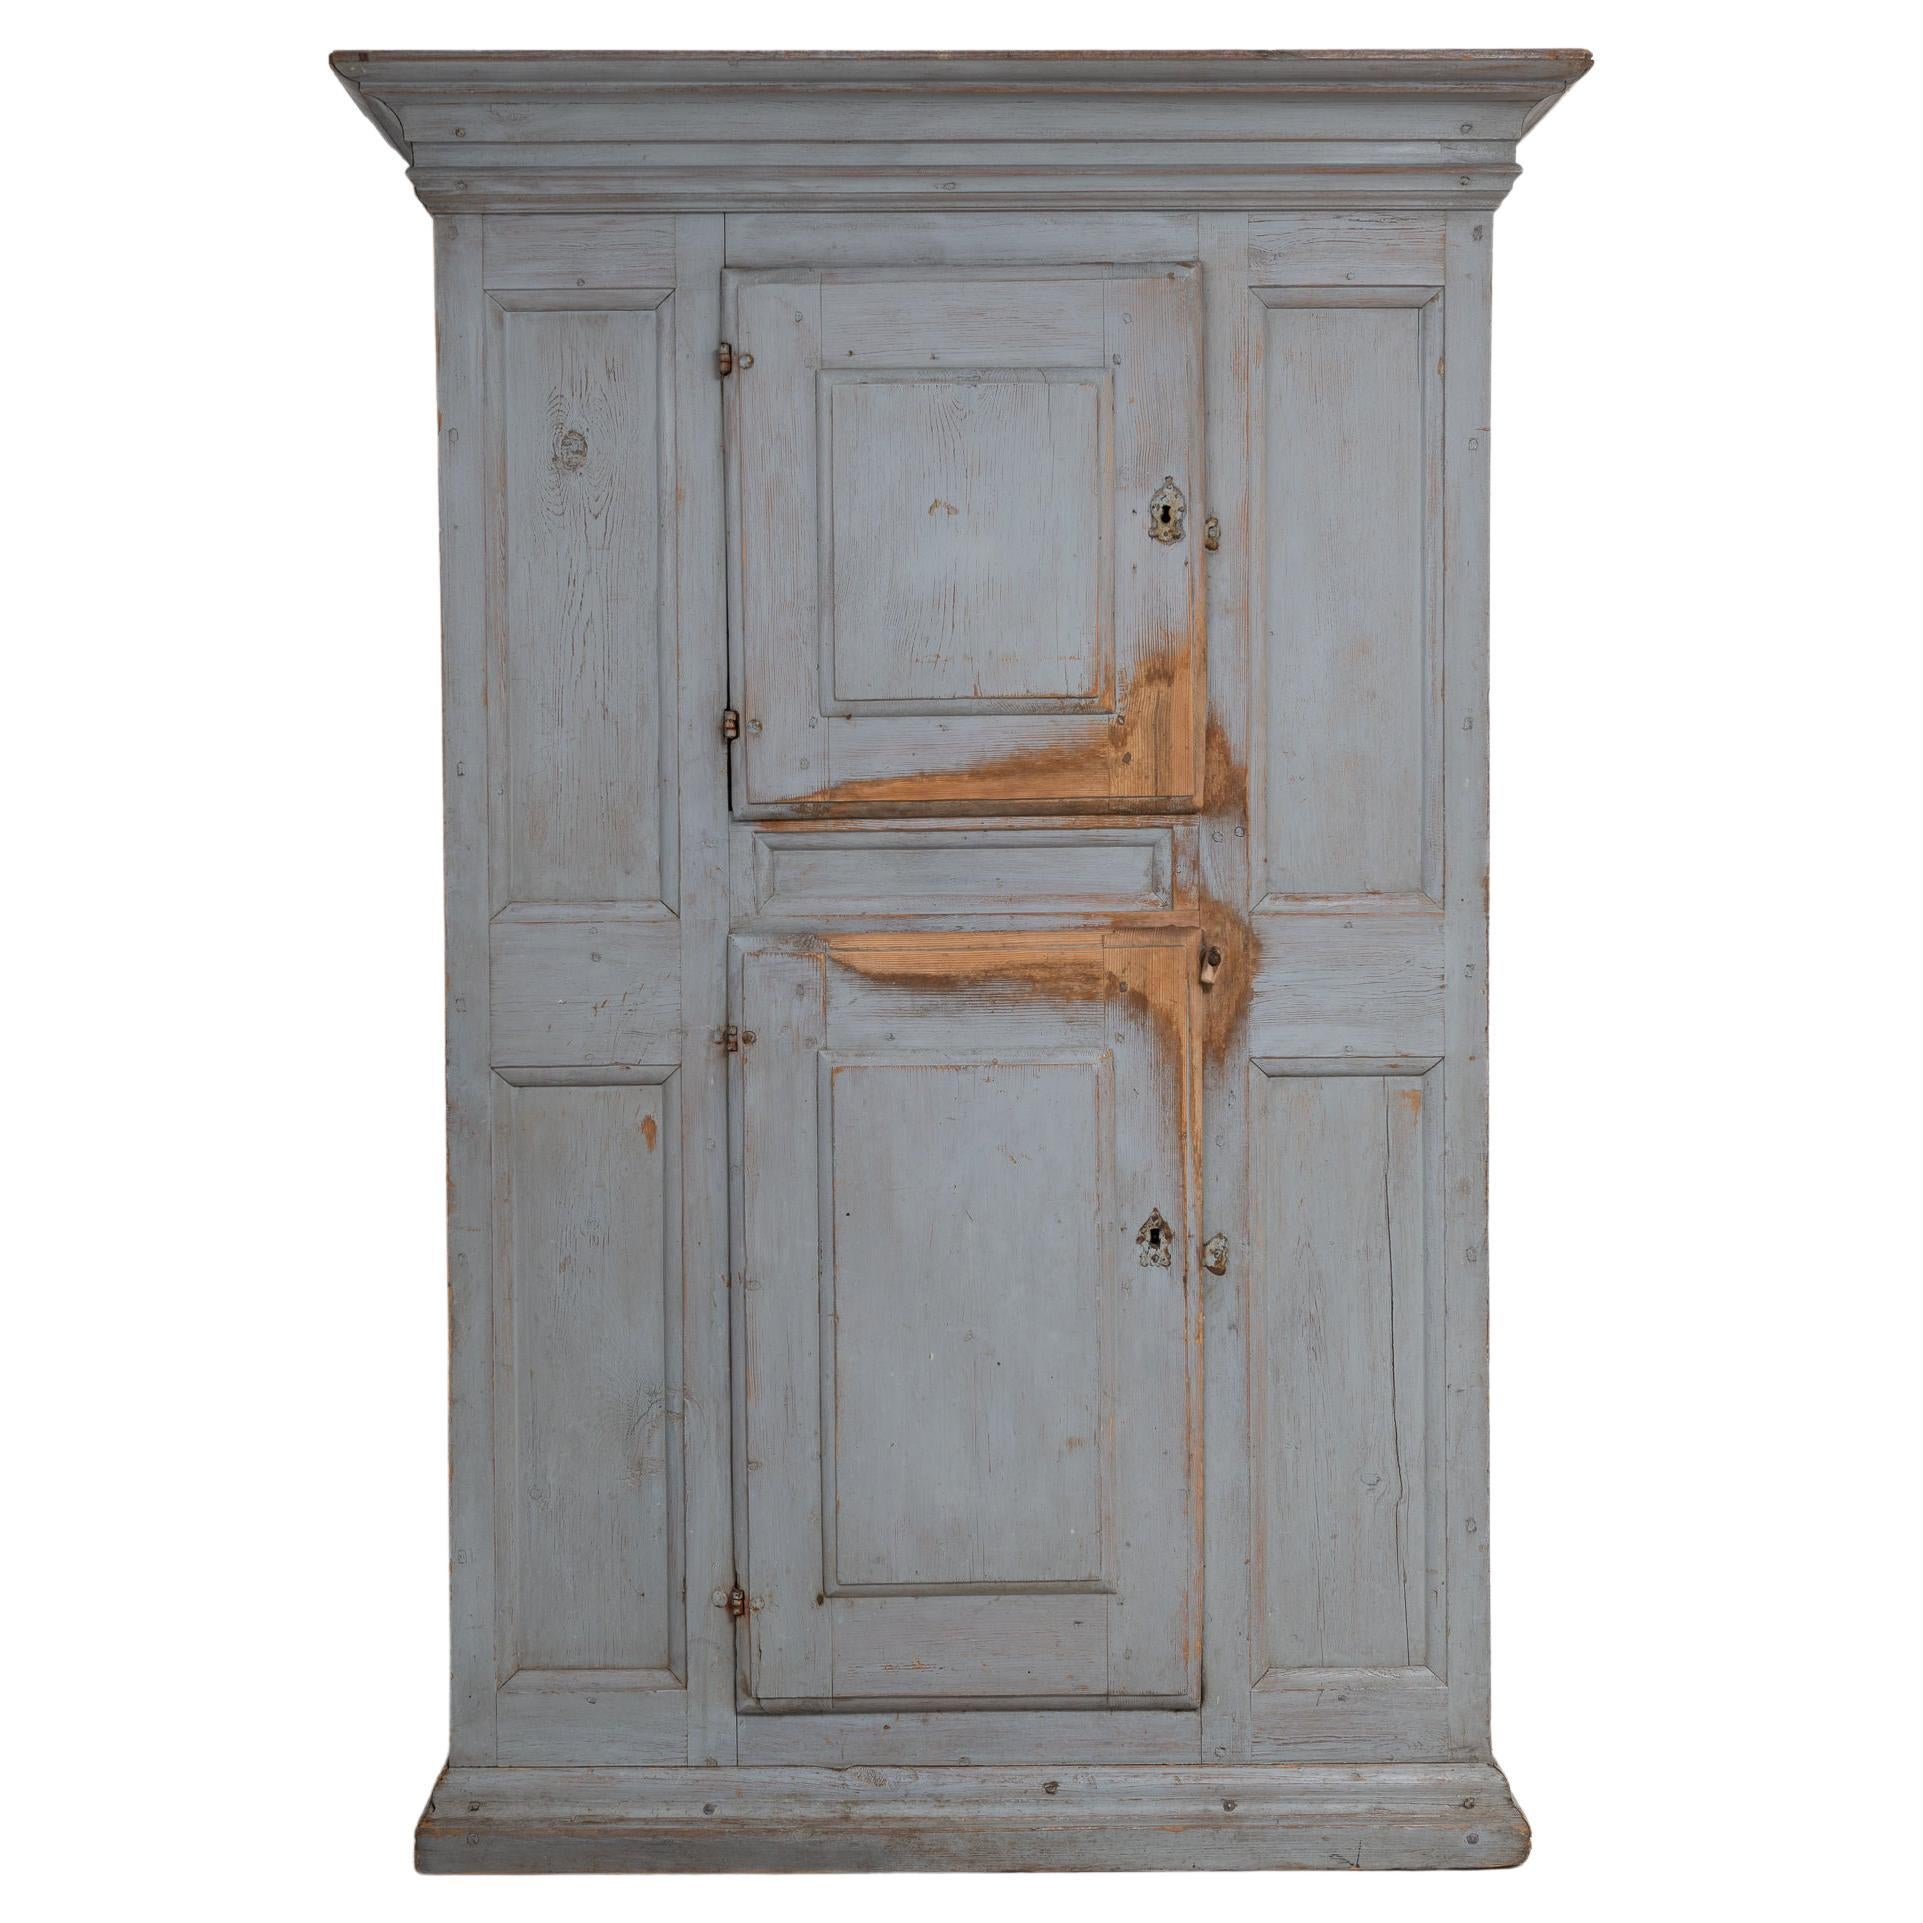 Mid 1700s Swedish Pine Painted Redwood Baroque Cabinet